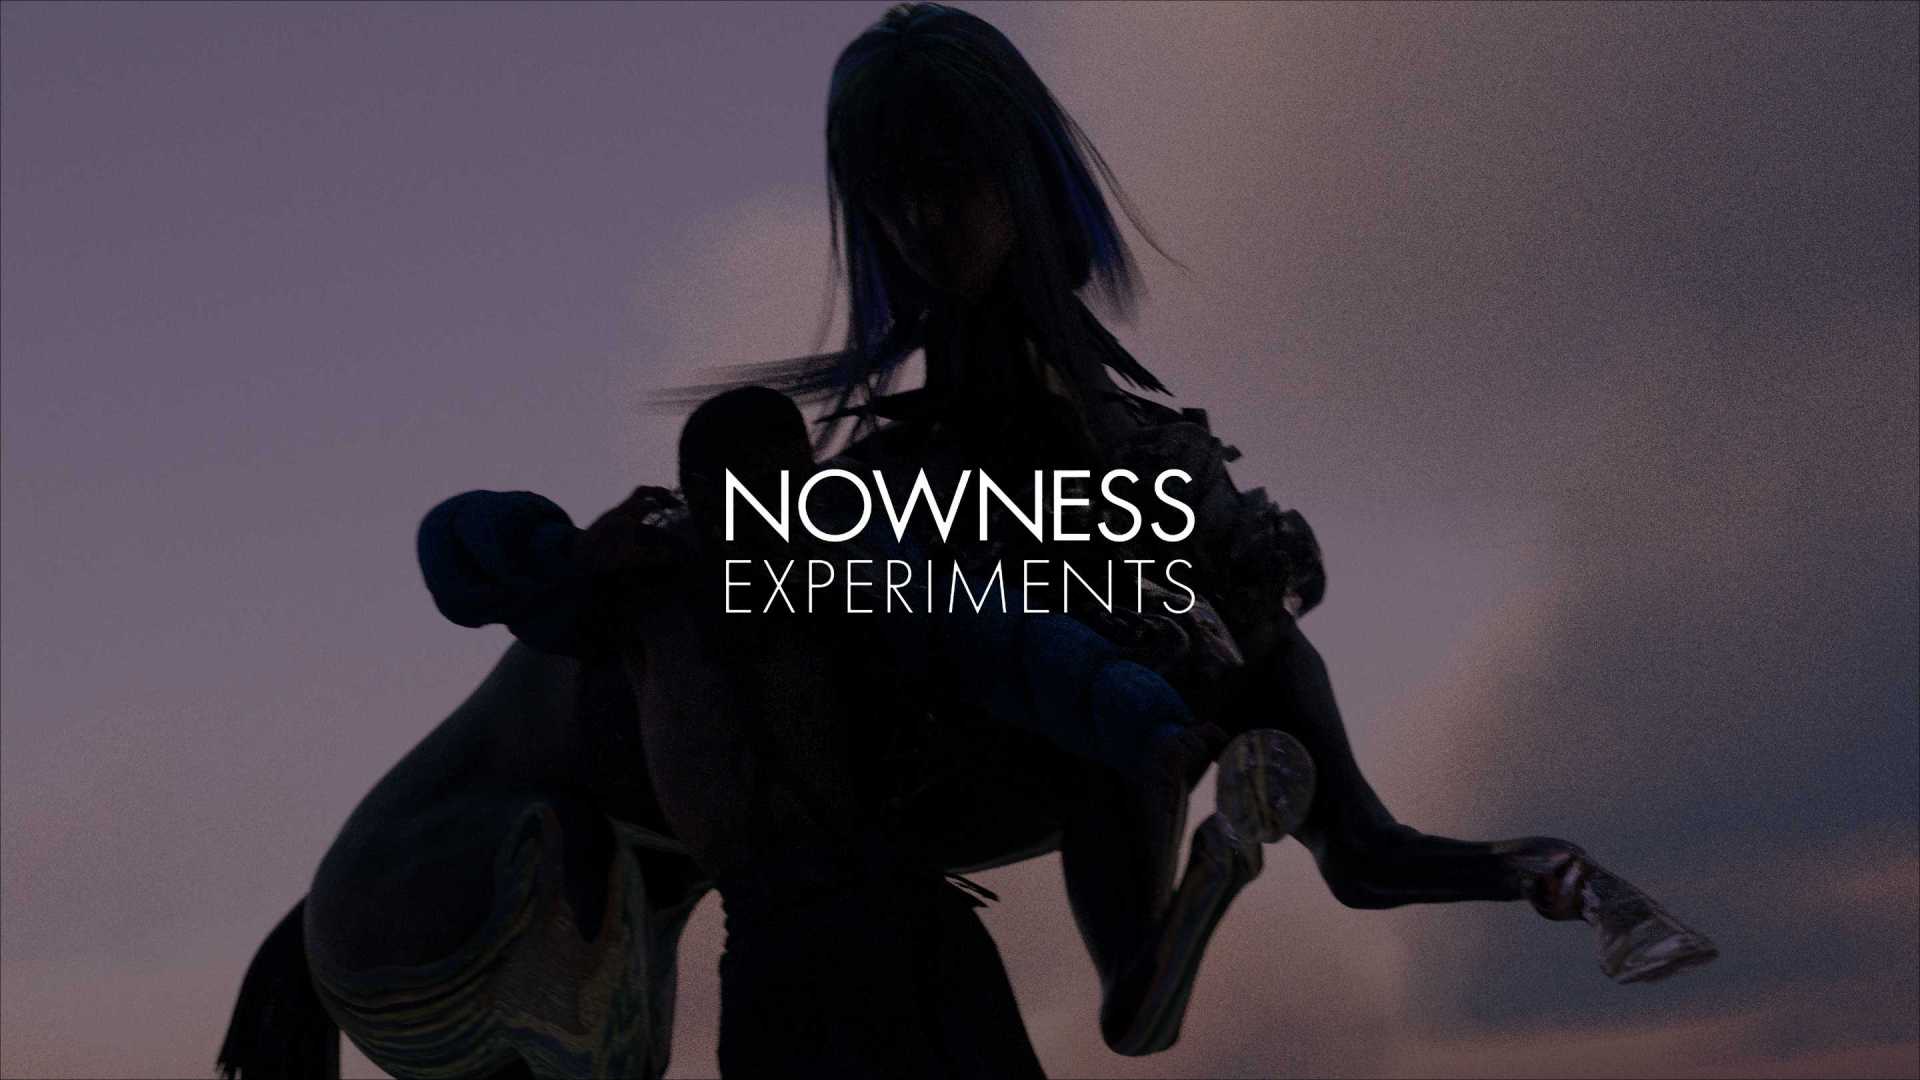 NOWNESS Experiments - 怒马礼赞